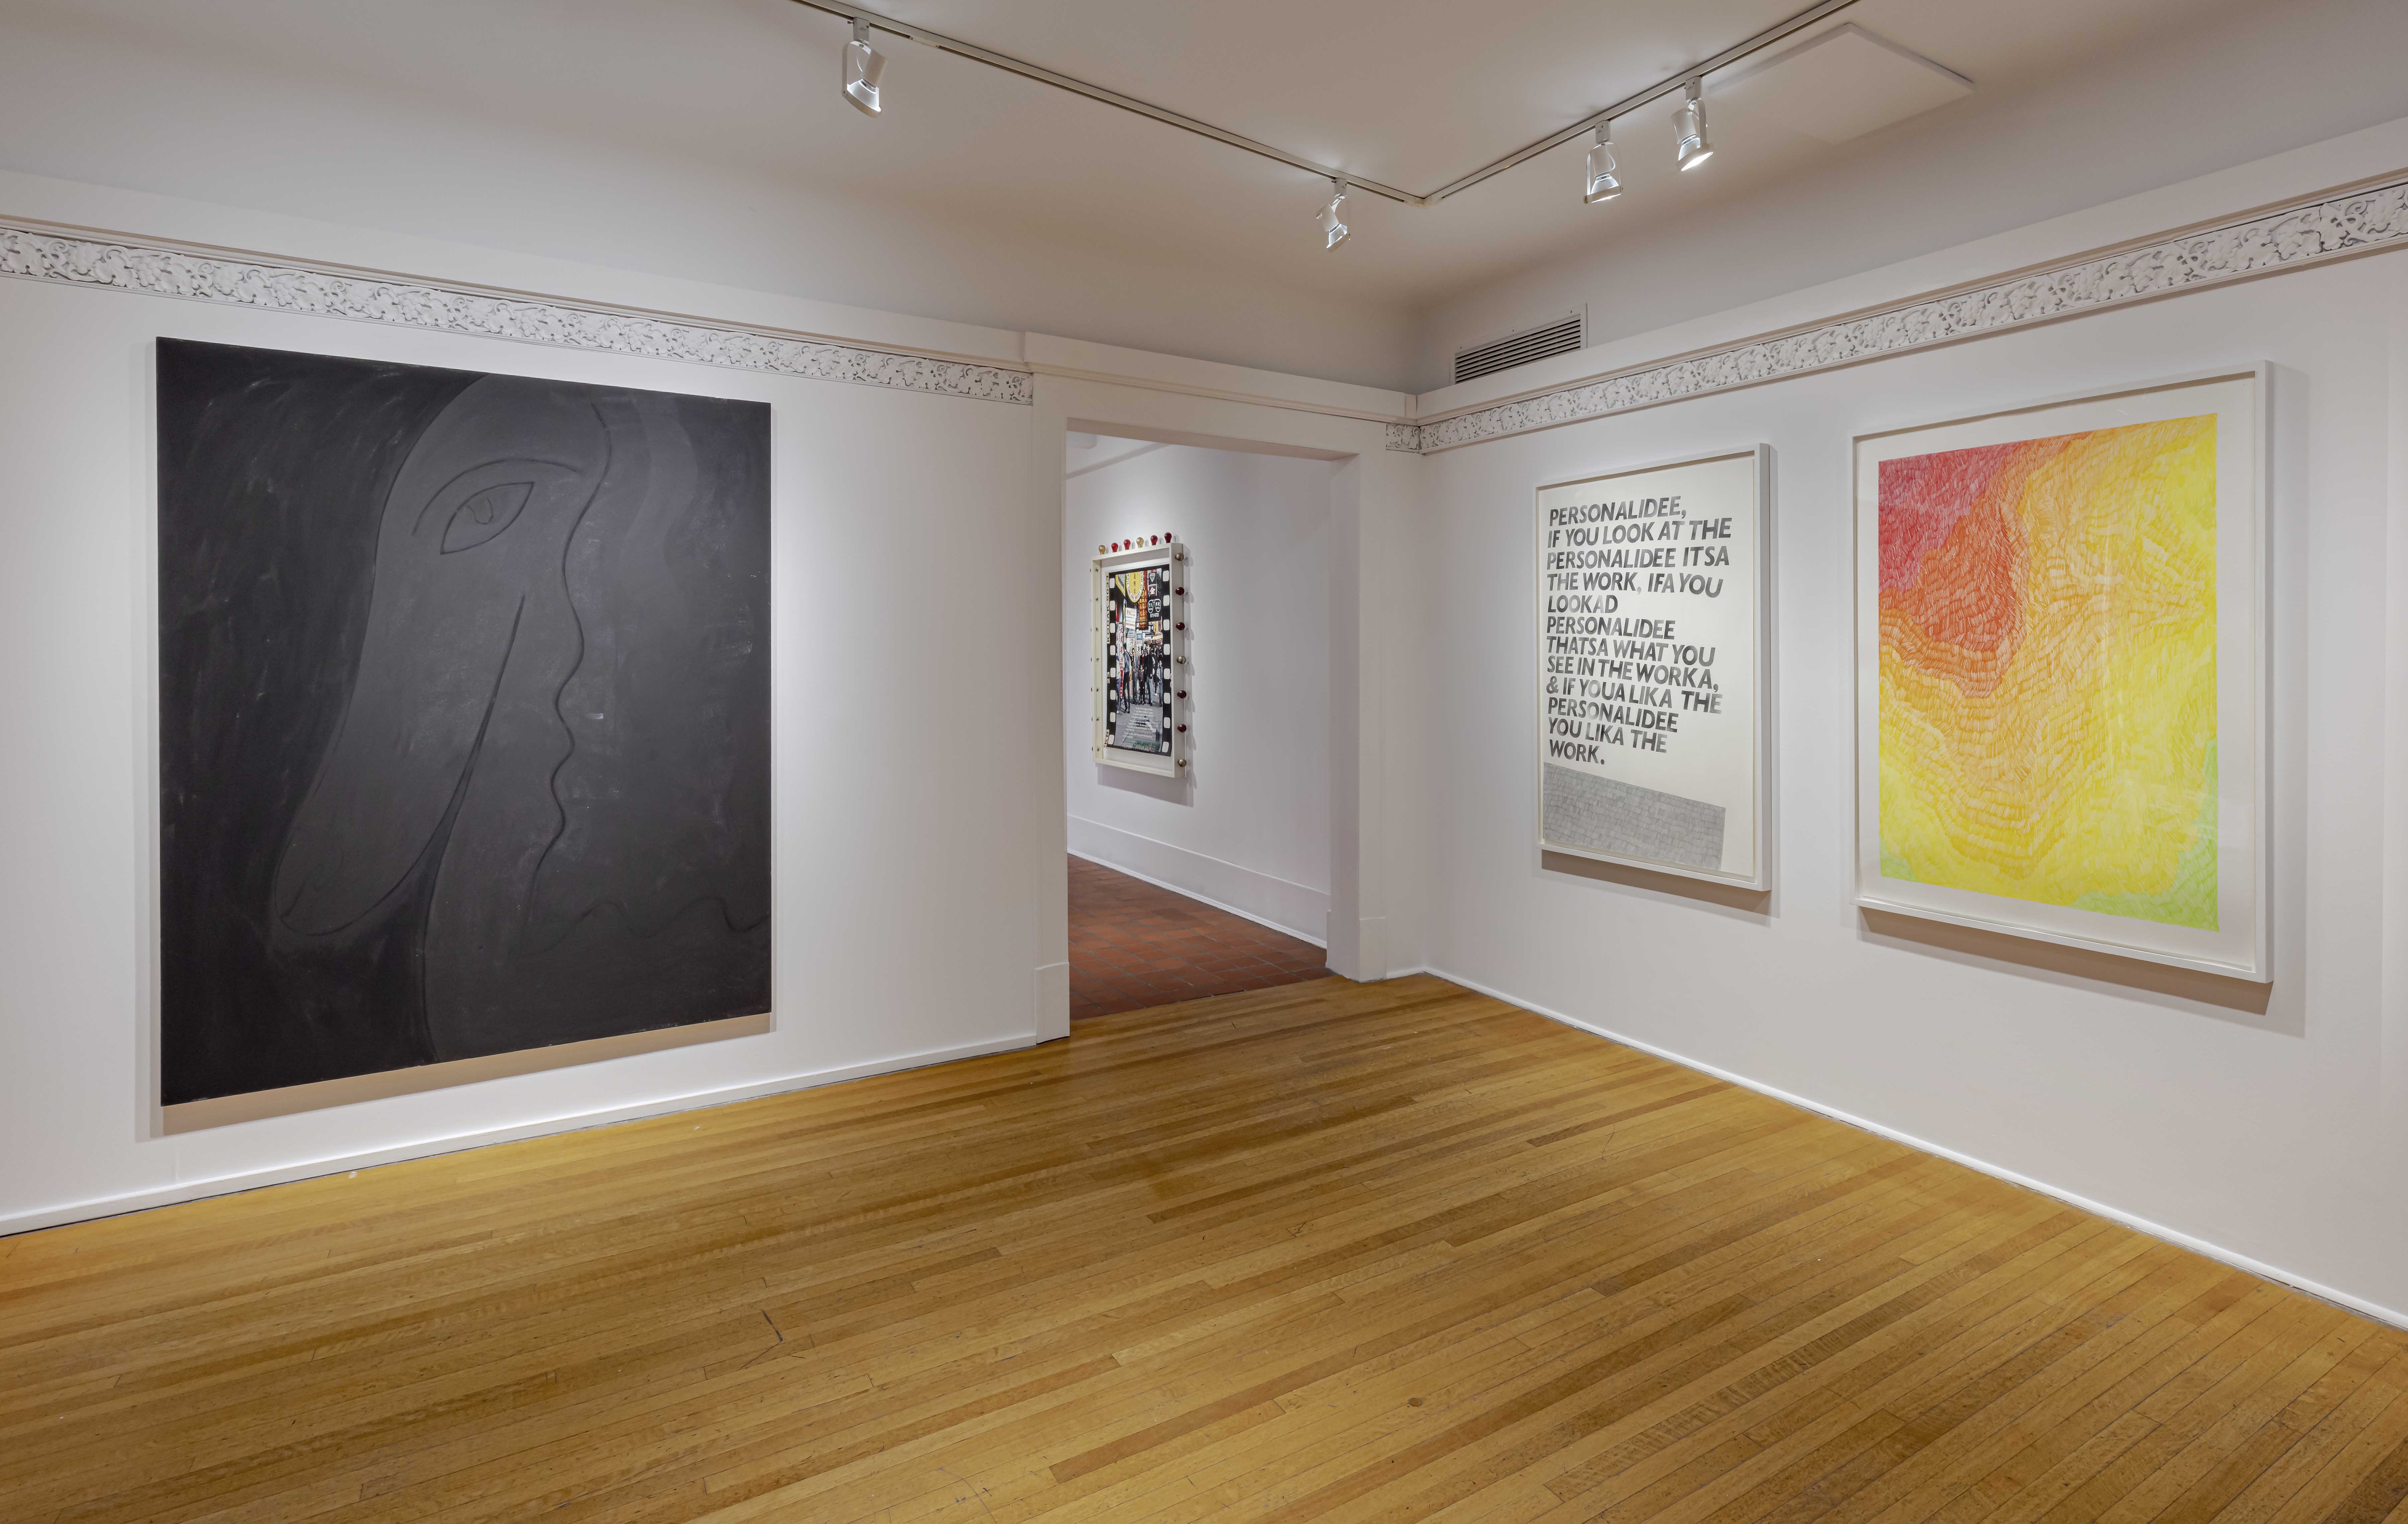 Installation view of Two Truths and a Lie at Oakville Galleries with work by Stan Denniston / Andrew Lee, Sojourner Truth Parsons, and Derek Sullivan. | Toni Hafkenscheid. Courtesy of Oakville Galleries.